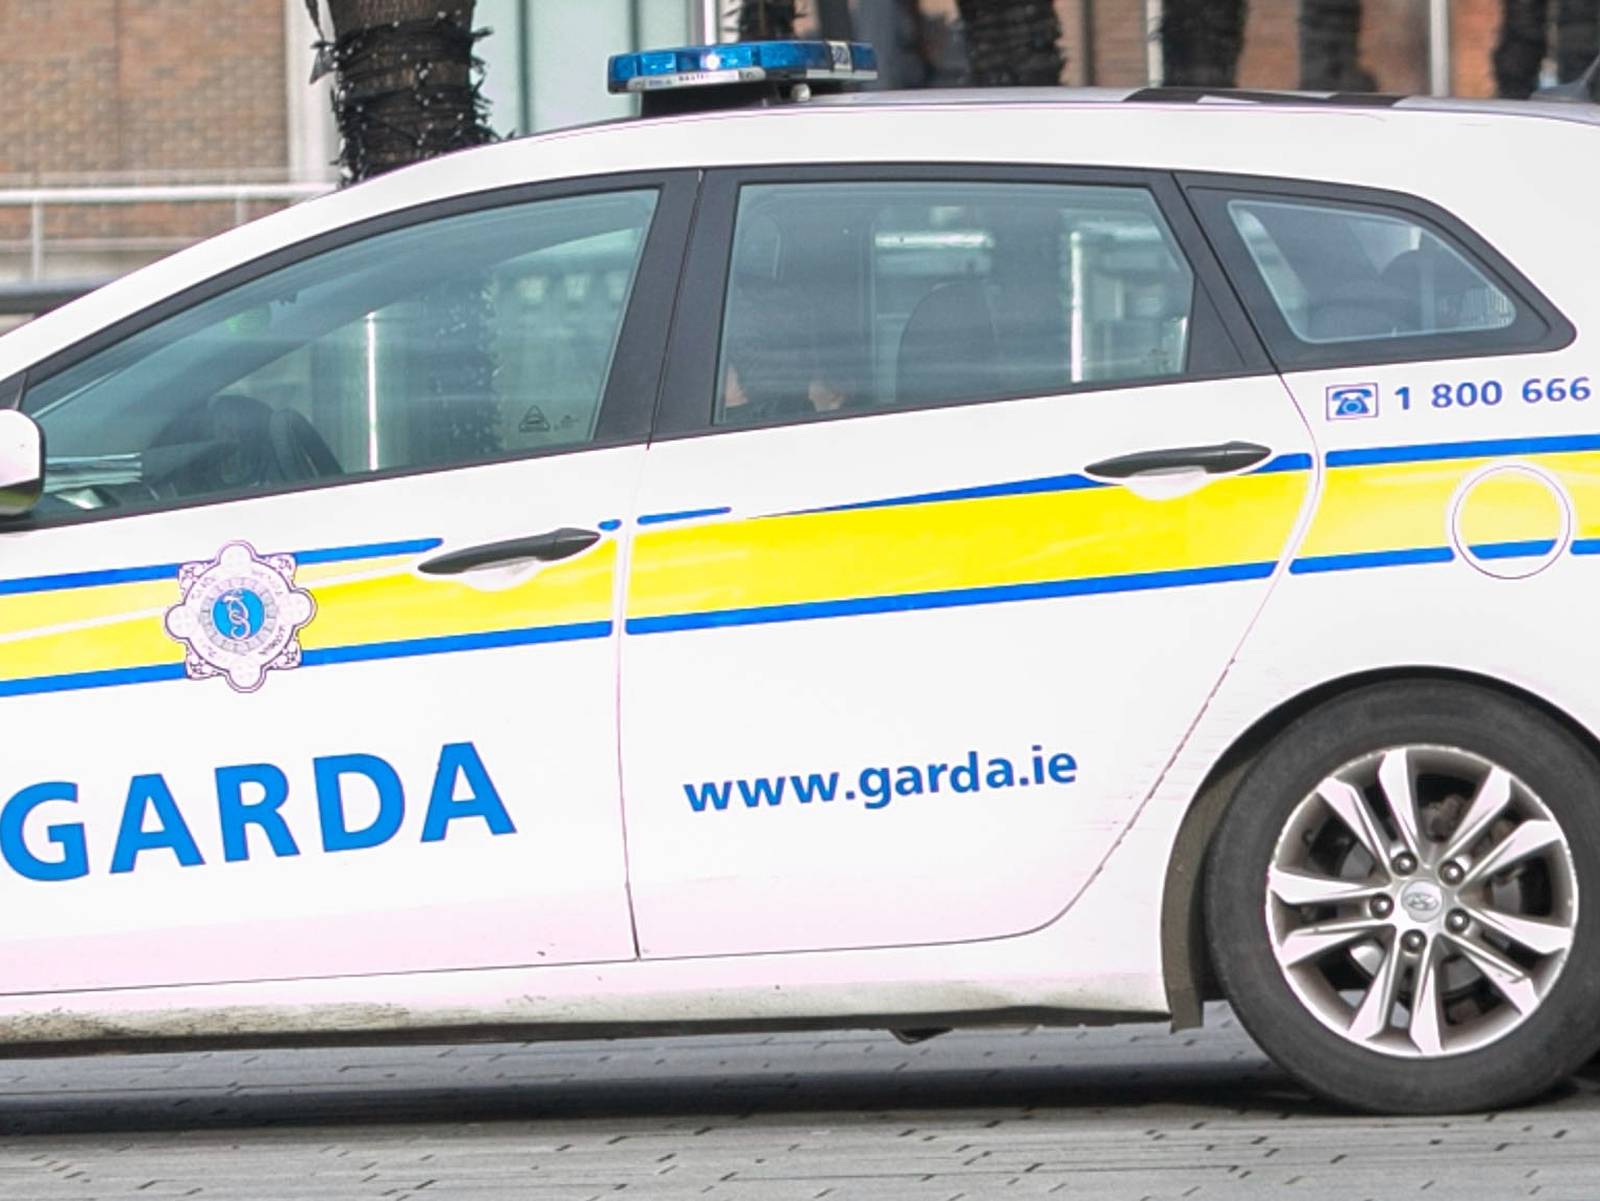 22/01/2021 ****FILE PHOTO ****
A Garda Car at the CHQ building at The IFSC in Dublin's city Centre 
yesterday.Garda in Store Street investigating the serious assault that occurred on the pedestrian walkway, between Georges Dock and Custom House Quay IFSC Dublin 1 on Wednesday night 20th January 2021 have made an arrest. 
Photo:Gareth Chaney/Collins